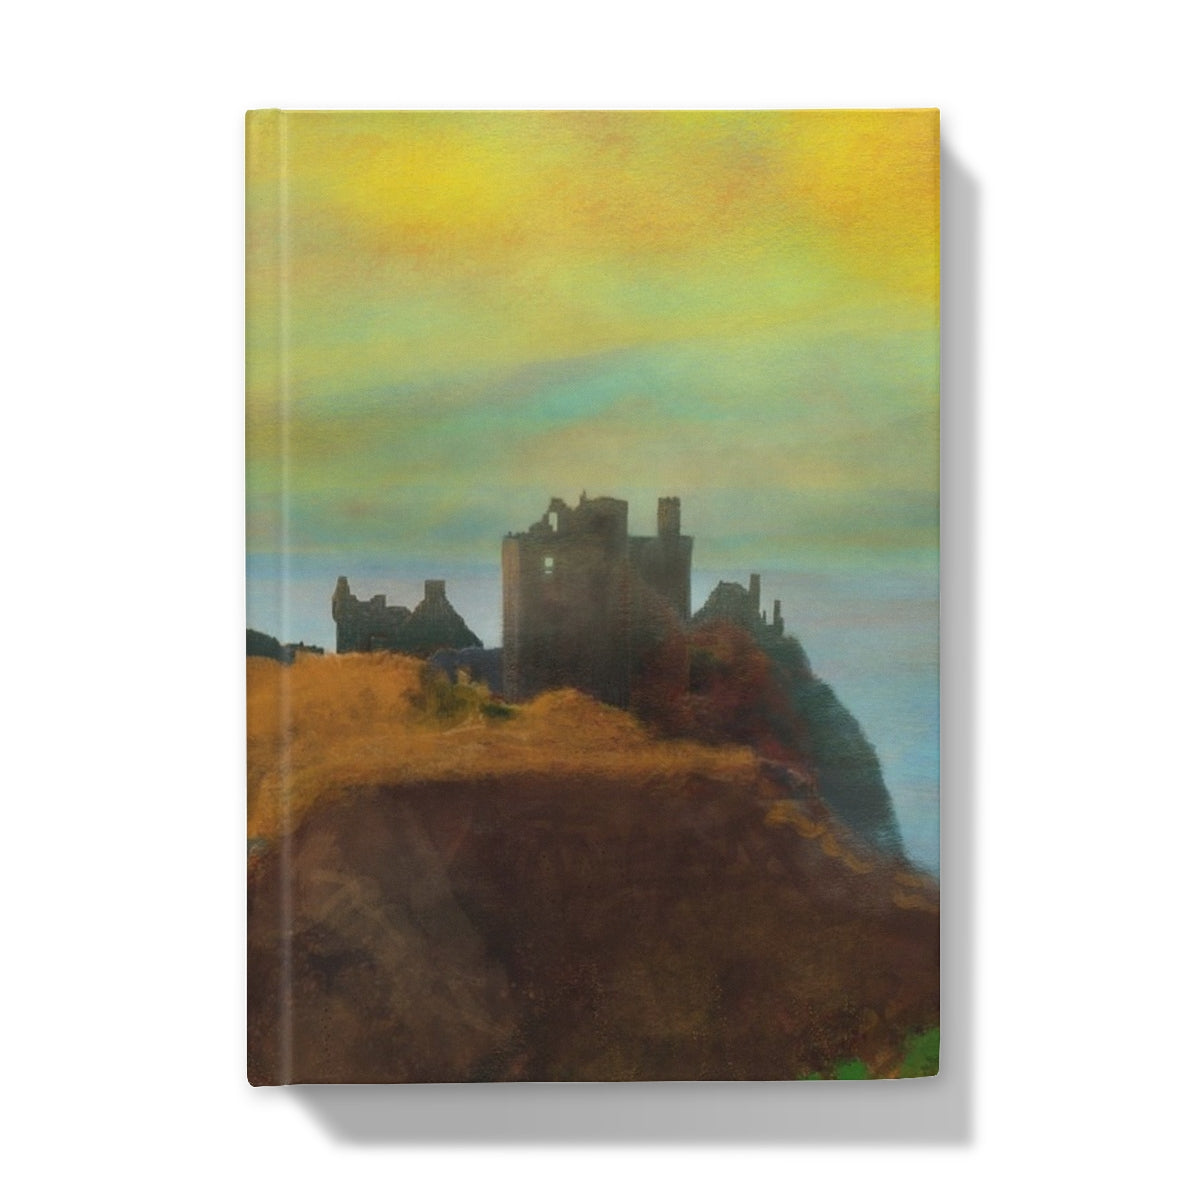 Dunnottar Castle Dusk Art Gifts Hardback Journal-Journals & Notebooks-Historic & Iconic Scotland Art Gallery-5"x7"-Lined-Paintings, Prints, Homeware, Art Gifts From Scotland By Scottish Artist Kevin Hunter